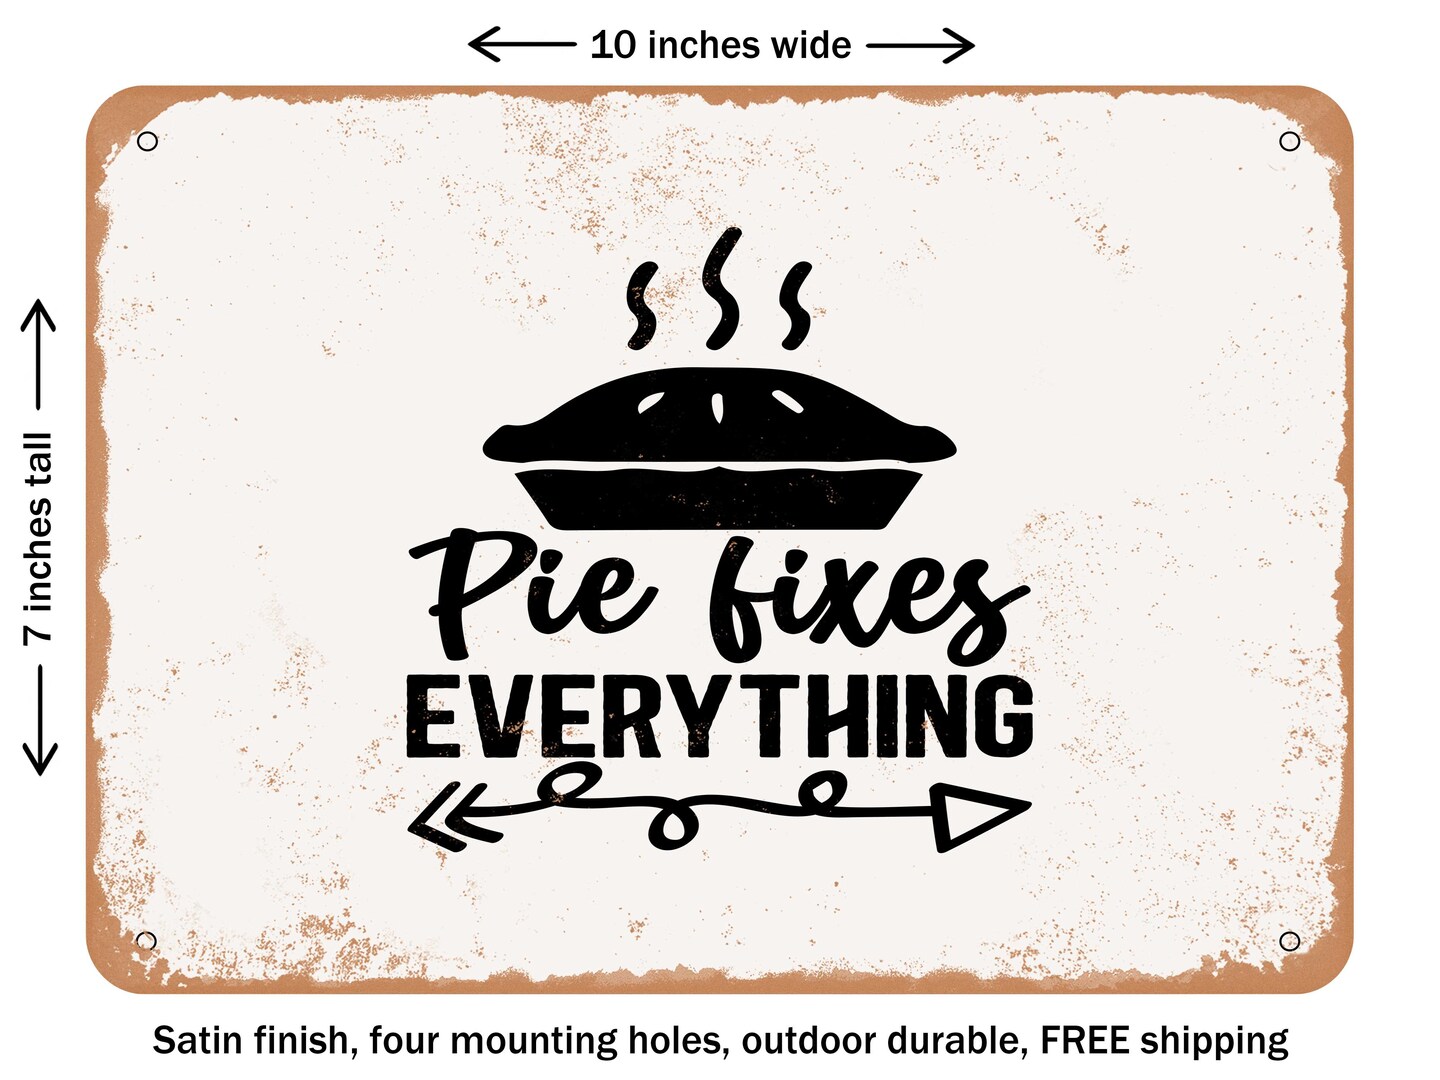 DECORATIVE METAL SIGN - Pie Fixes Everything - Vintage Rusty Look